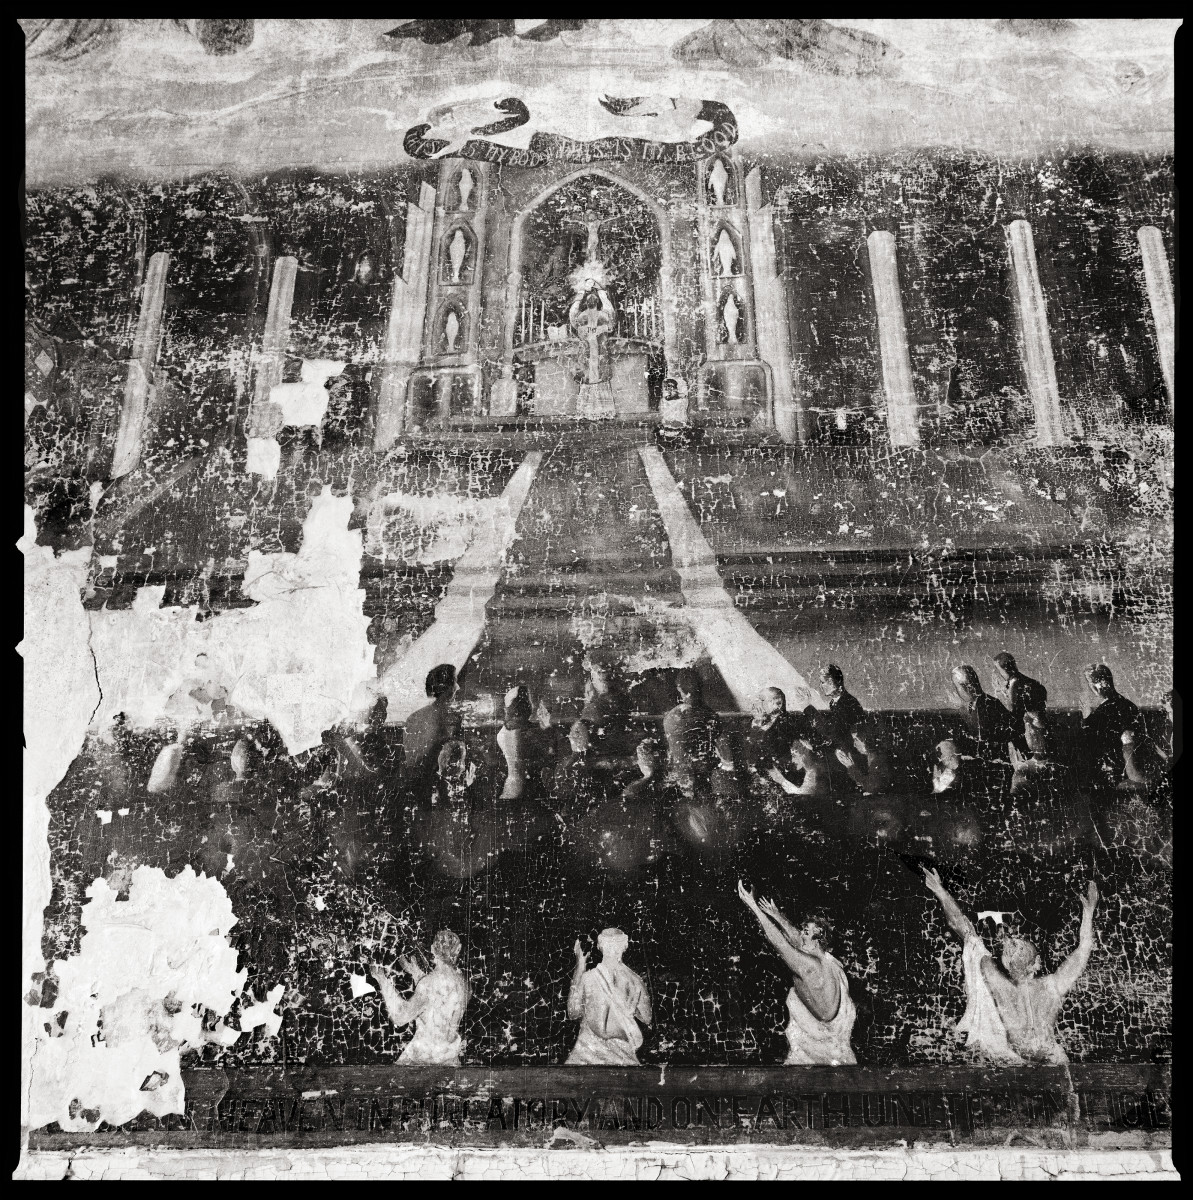 Fresco, Chaplain's Office by Eric T. Kunsman  Image: ID: A black and white image shows a religious painting that is chipping. There are four visible figures in white in the front and many figures in black behind in front of them.  There is a figurehead at the top of the painting in a building of sorts.